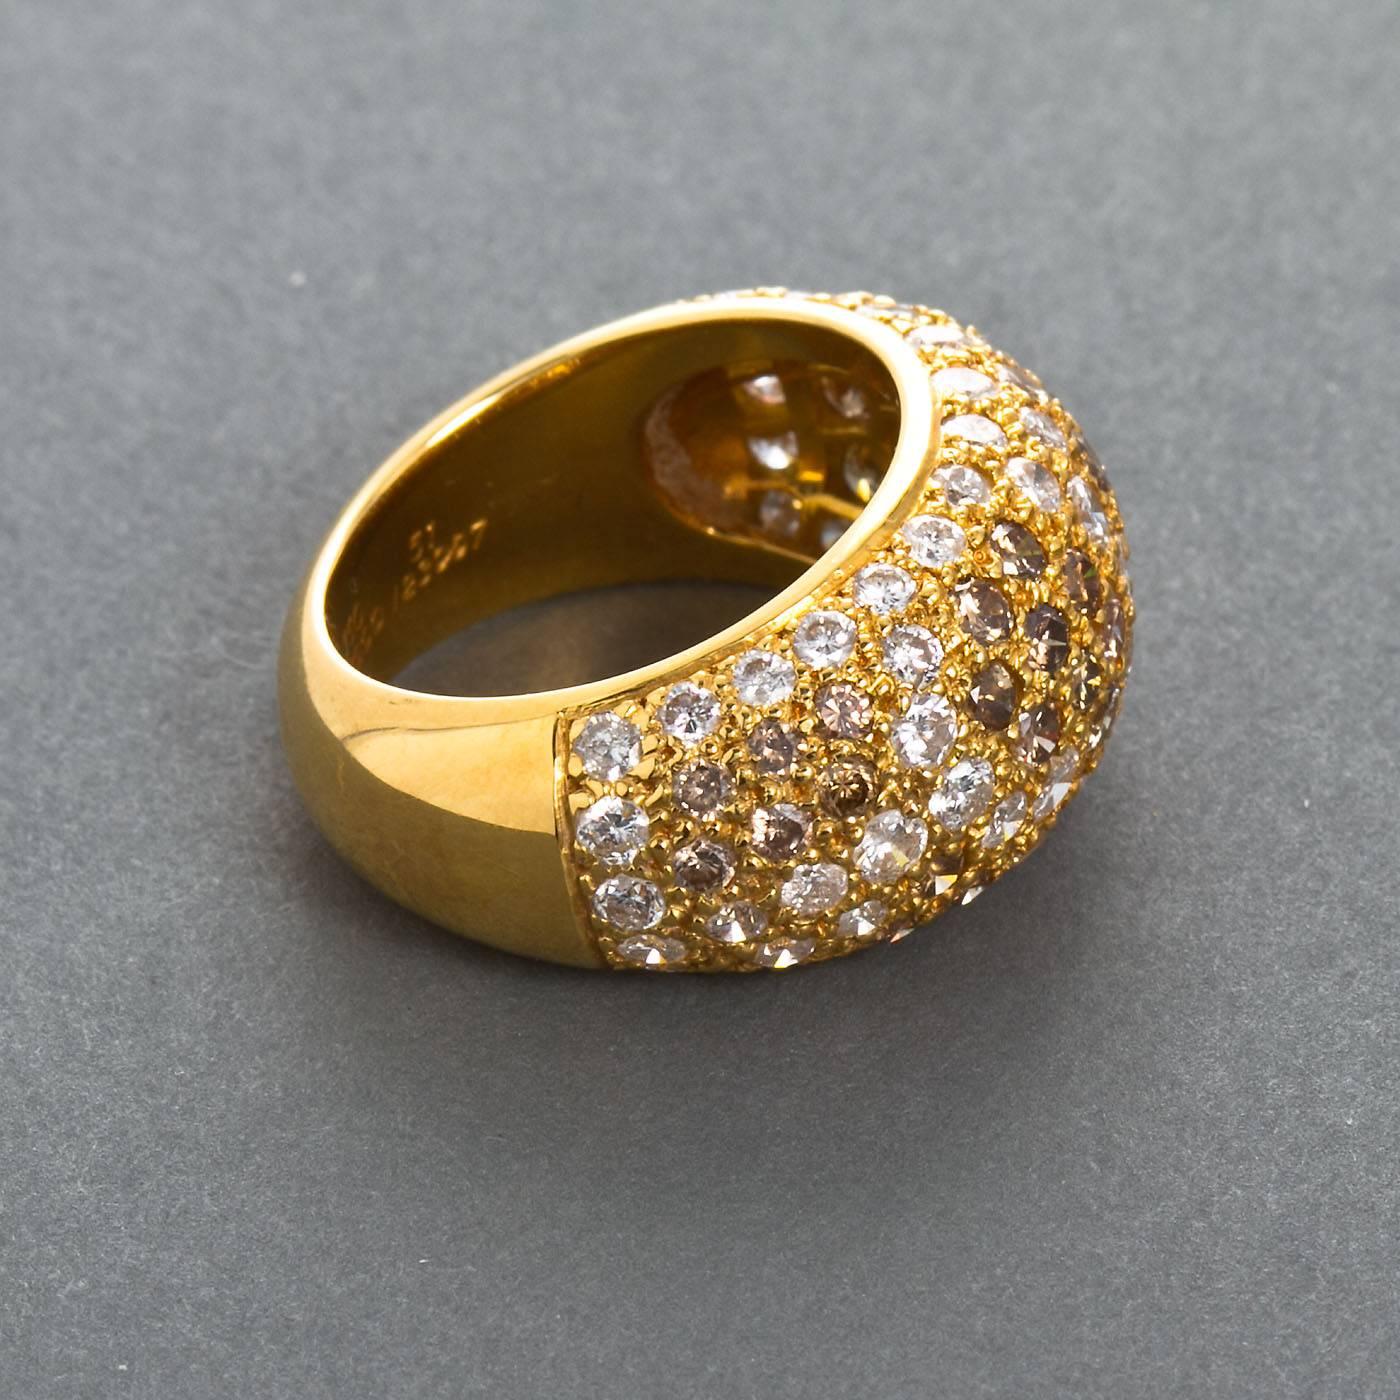 An 18 karat gold 'boule' (bombé) ring by Cartier Paris from the Sauvage collection. Signed and numbered by Cartier, with french assay and workshop marks.  Pave brown and white diamonds approximately halfway set around the band, mounted in 18k